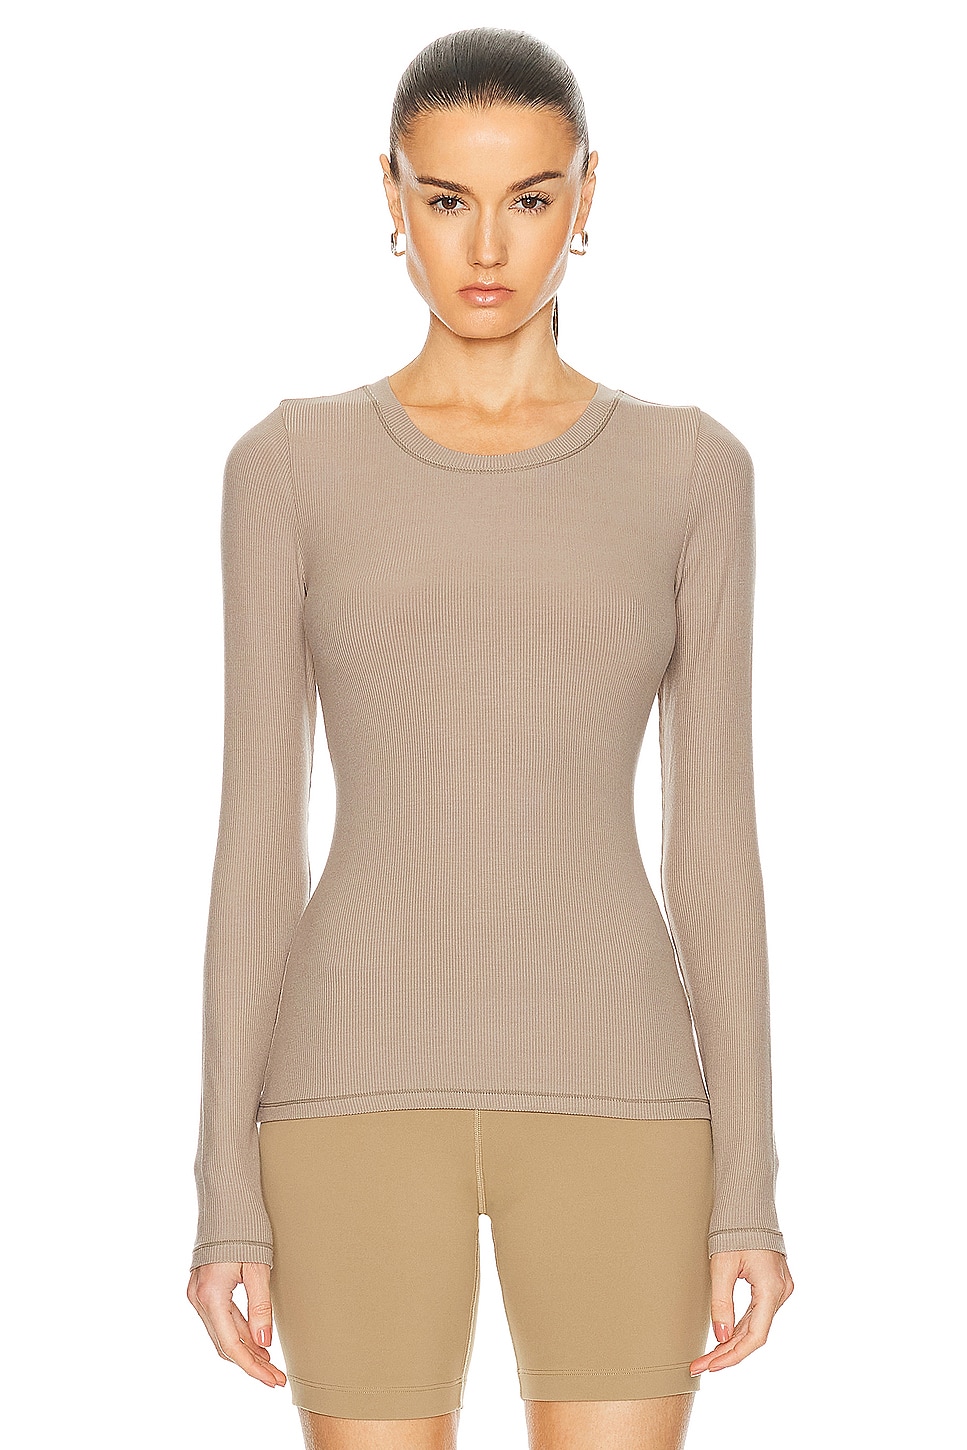 Image 1 of THE UPSIDE Tammy Long Sleeve Top in Pebble